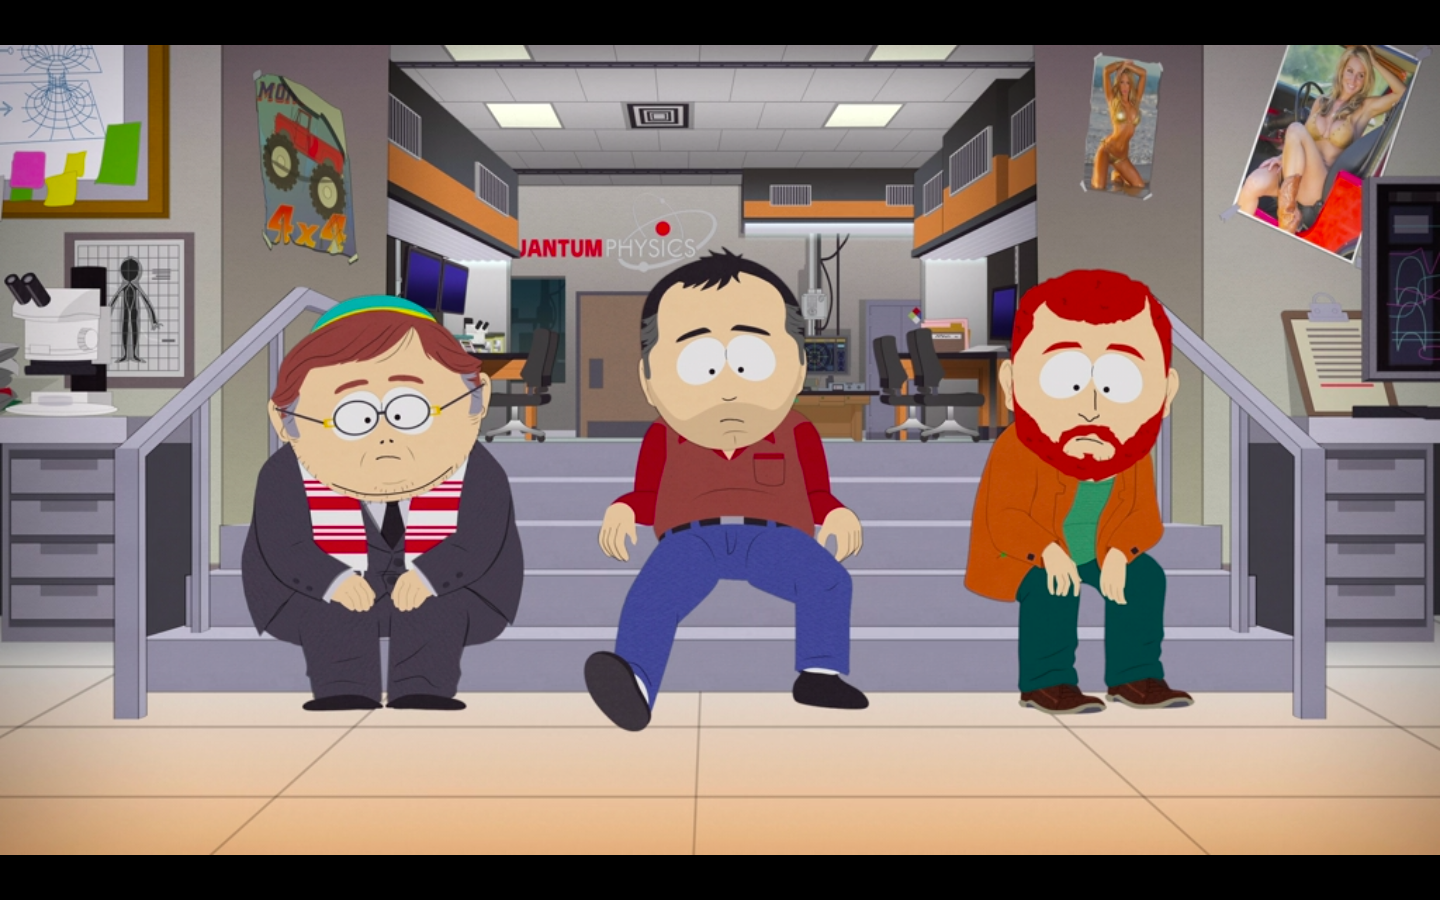 Cartmen, Stan, and Kyle in South Park Post Covid